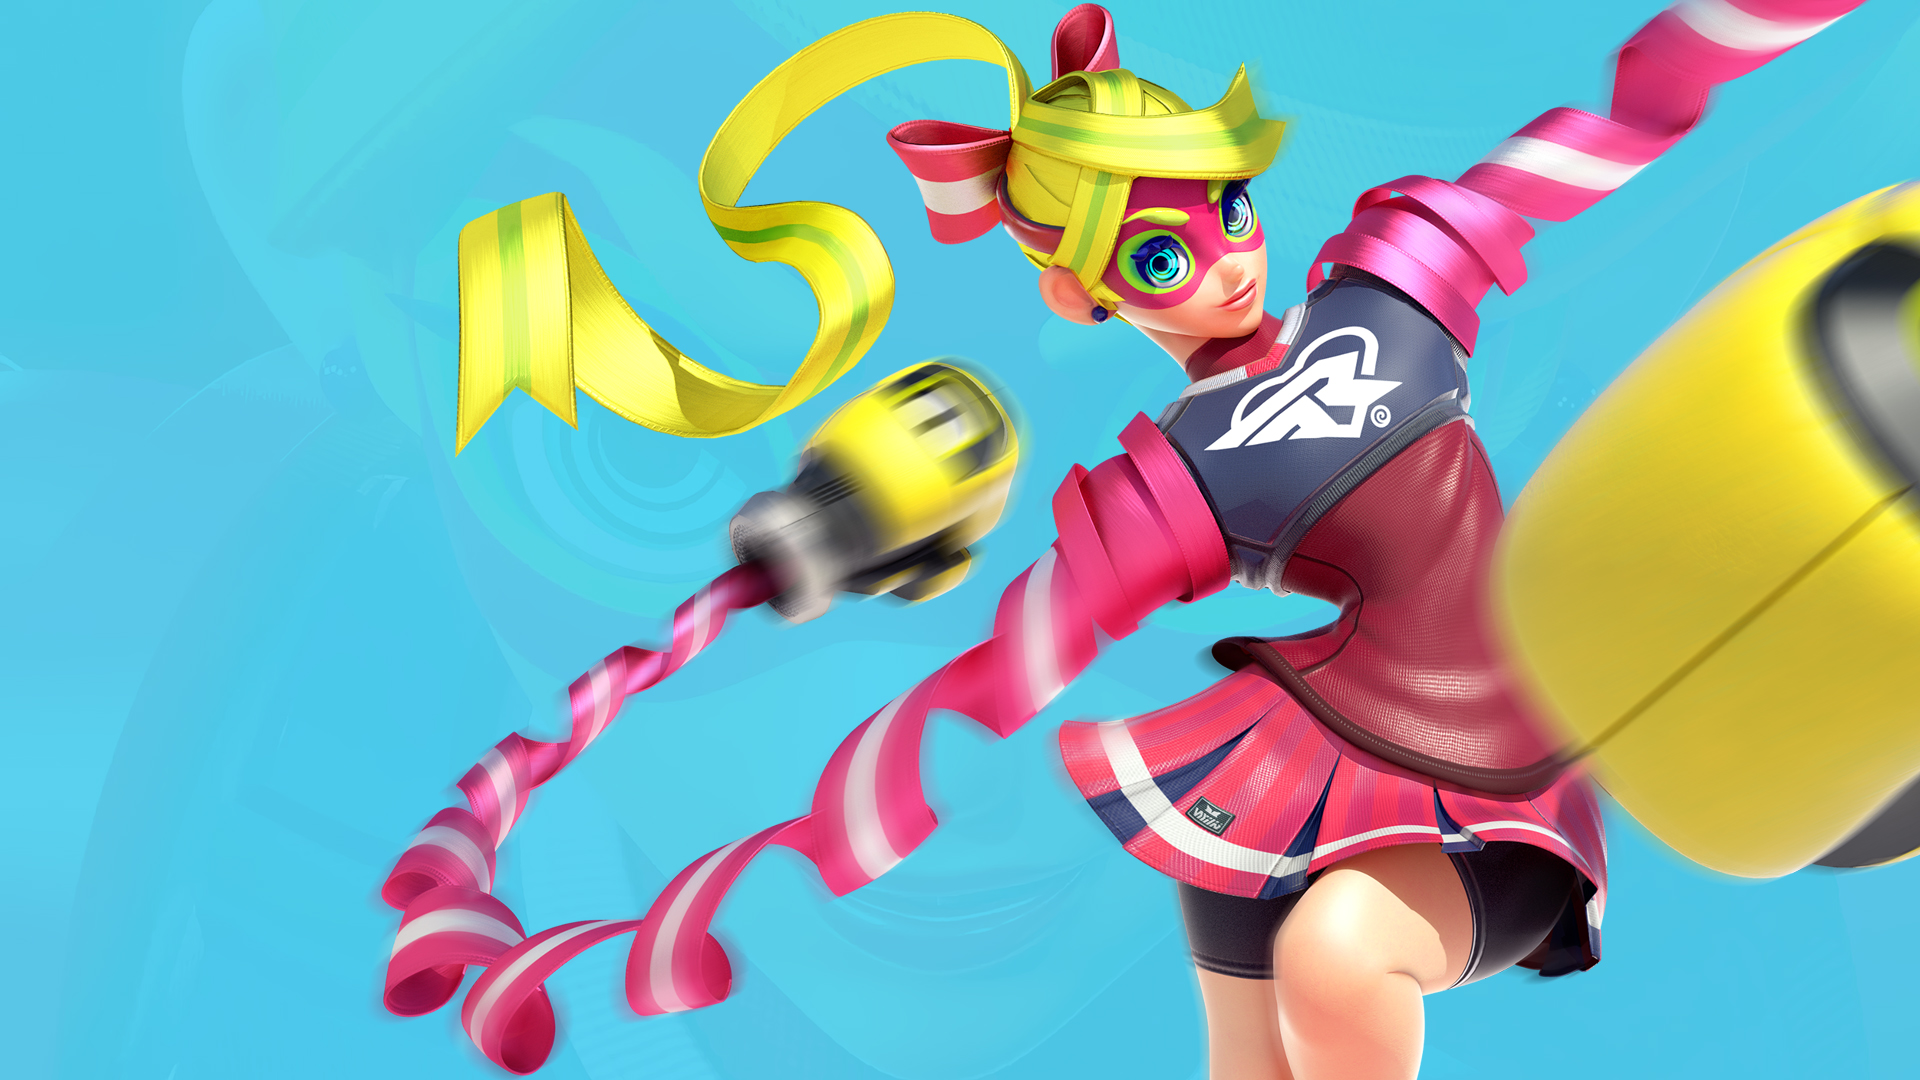 Fell In Love With Arms Made A Ribbon Girl Wallpaper Thought